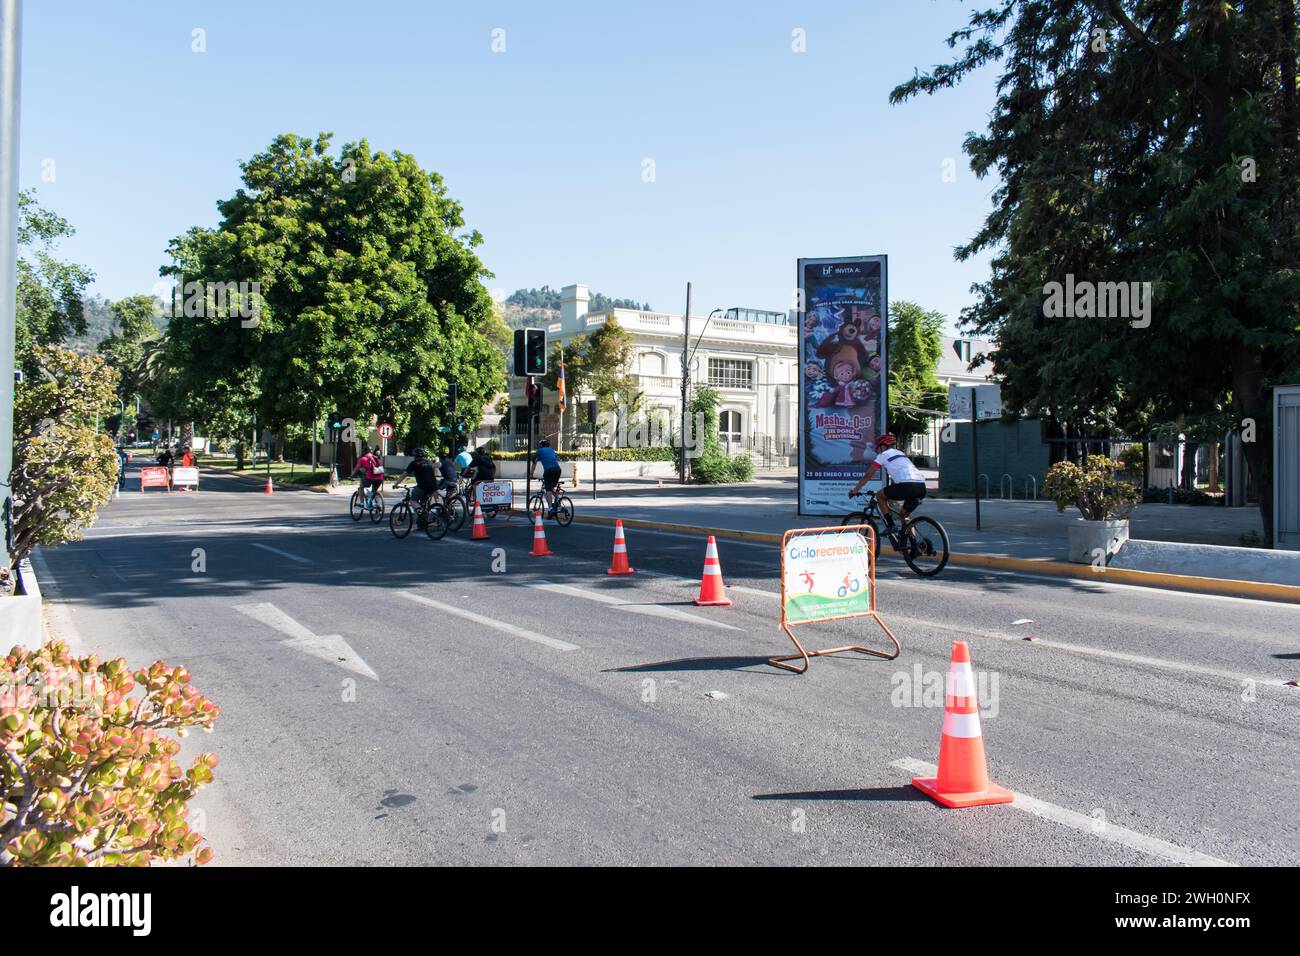 Ciclo Recreo Vía in Santiago de Chile turns streets into car-free pedestrian circuits for sports, recreation, and community gatherings. Stock Photo